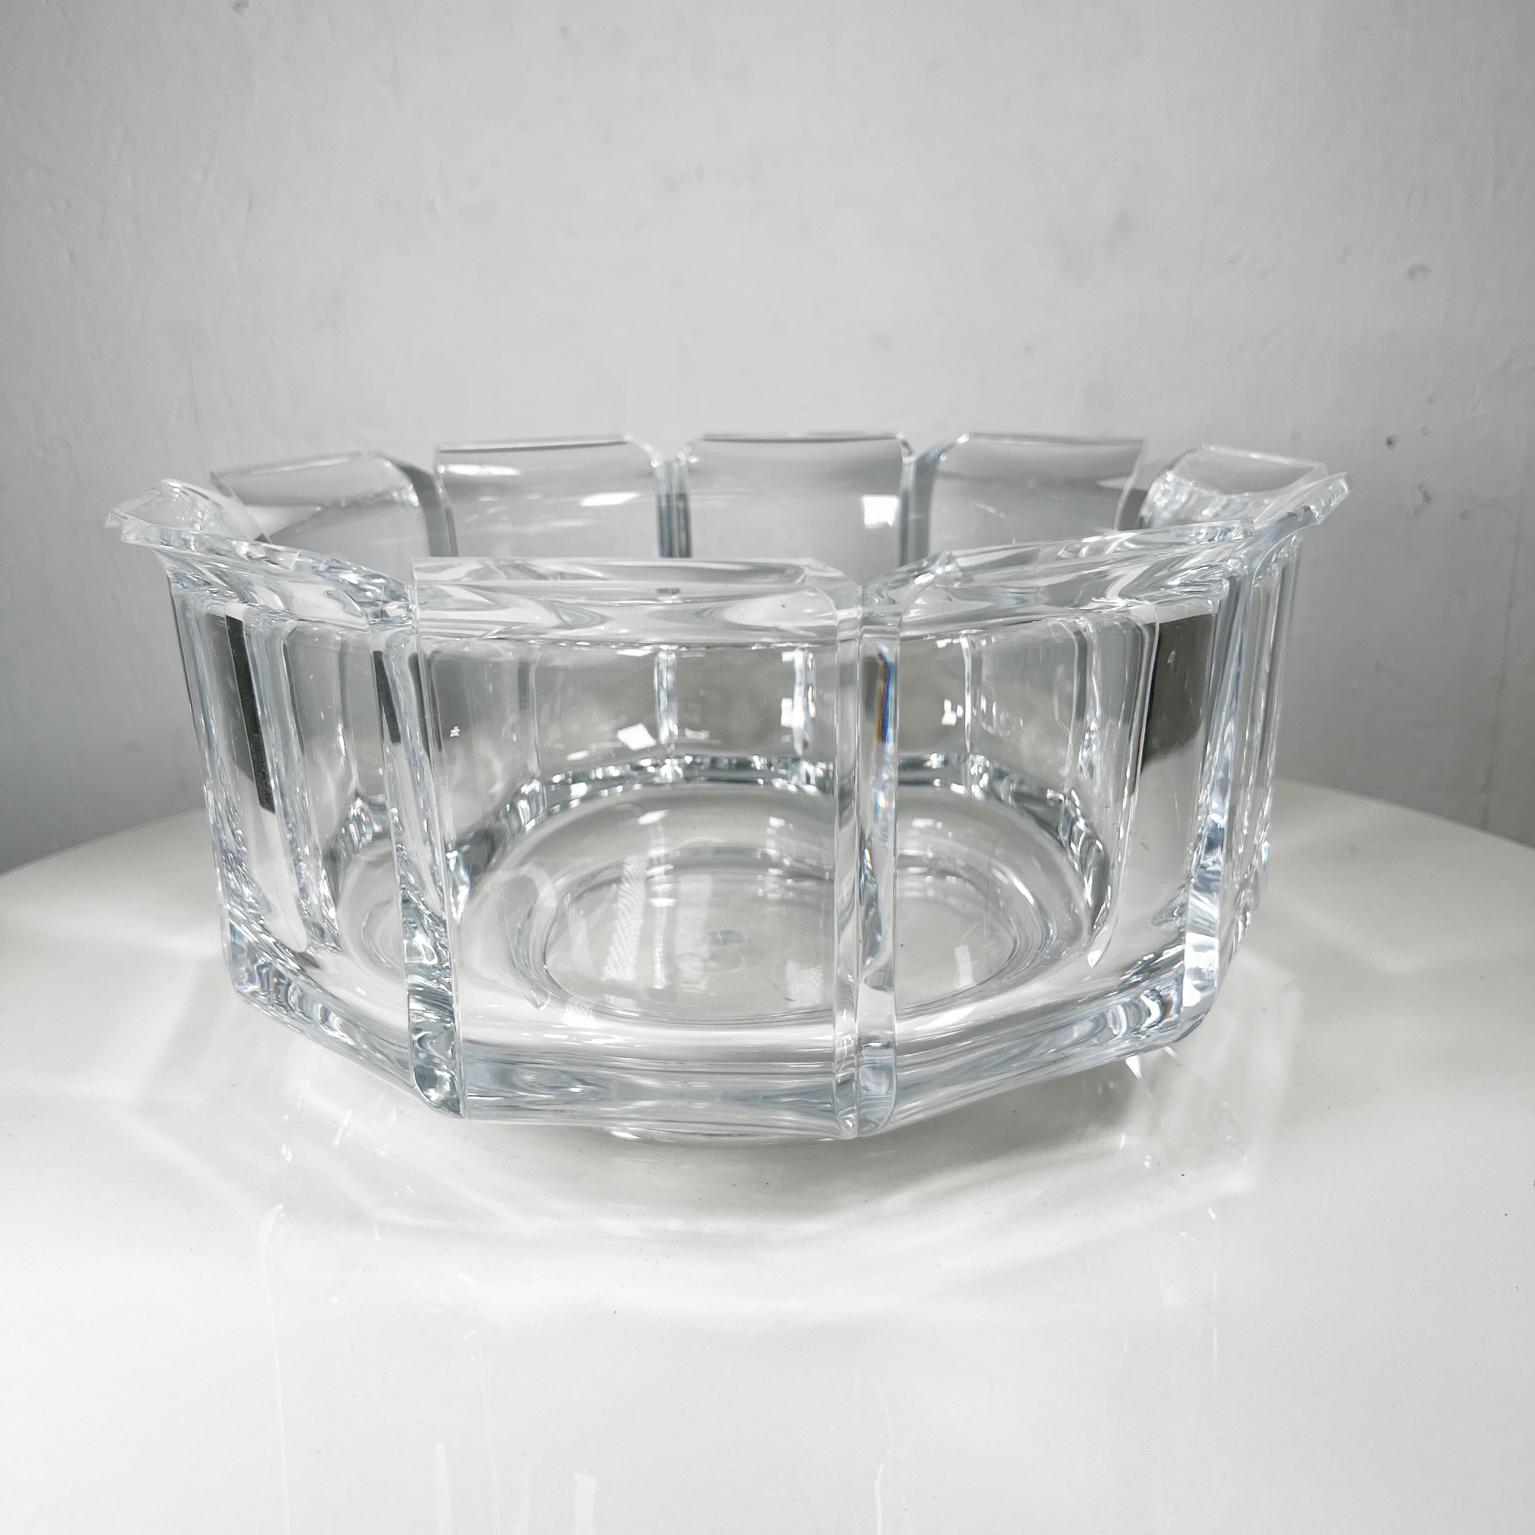 Vintage midcentury Grainware Lucite bowl by William Bounds
model Regal GW349
11.75 diameter x 5.88 tall
Preowned original vintage condition
See images please.